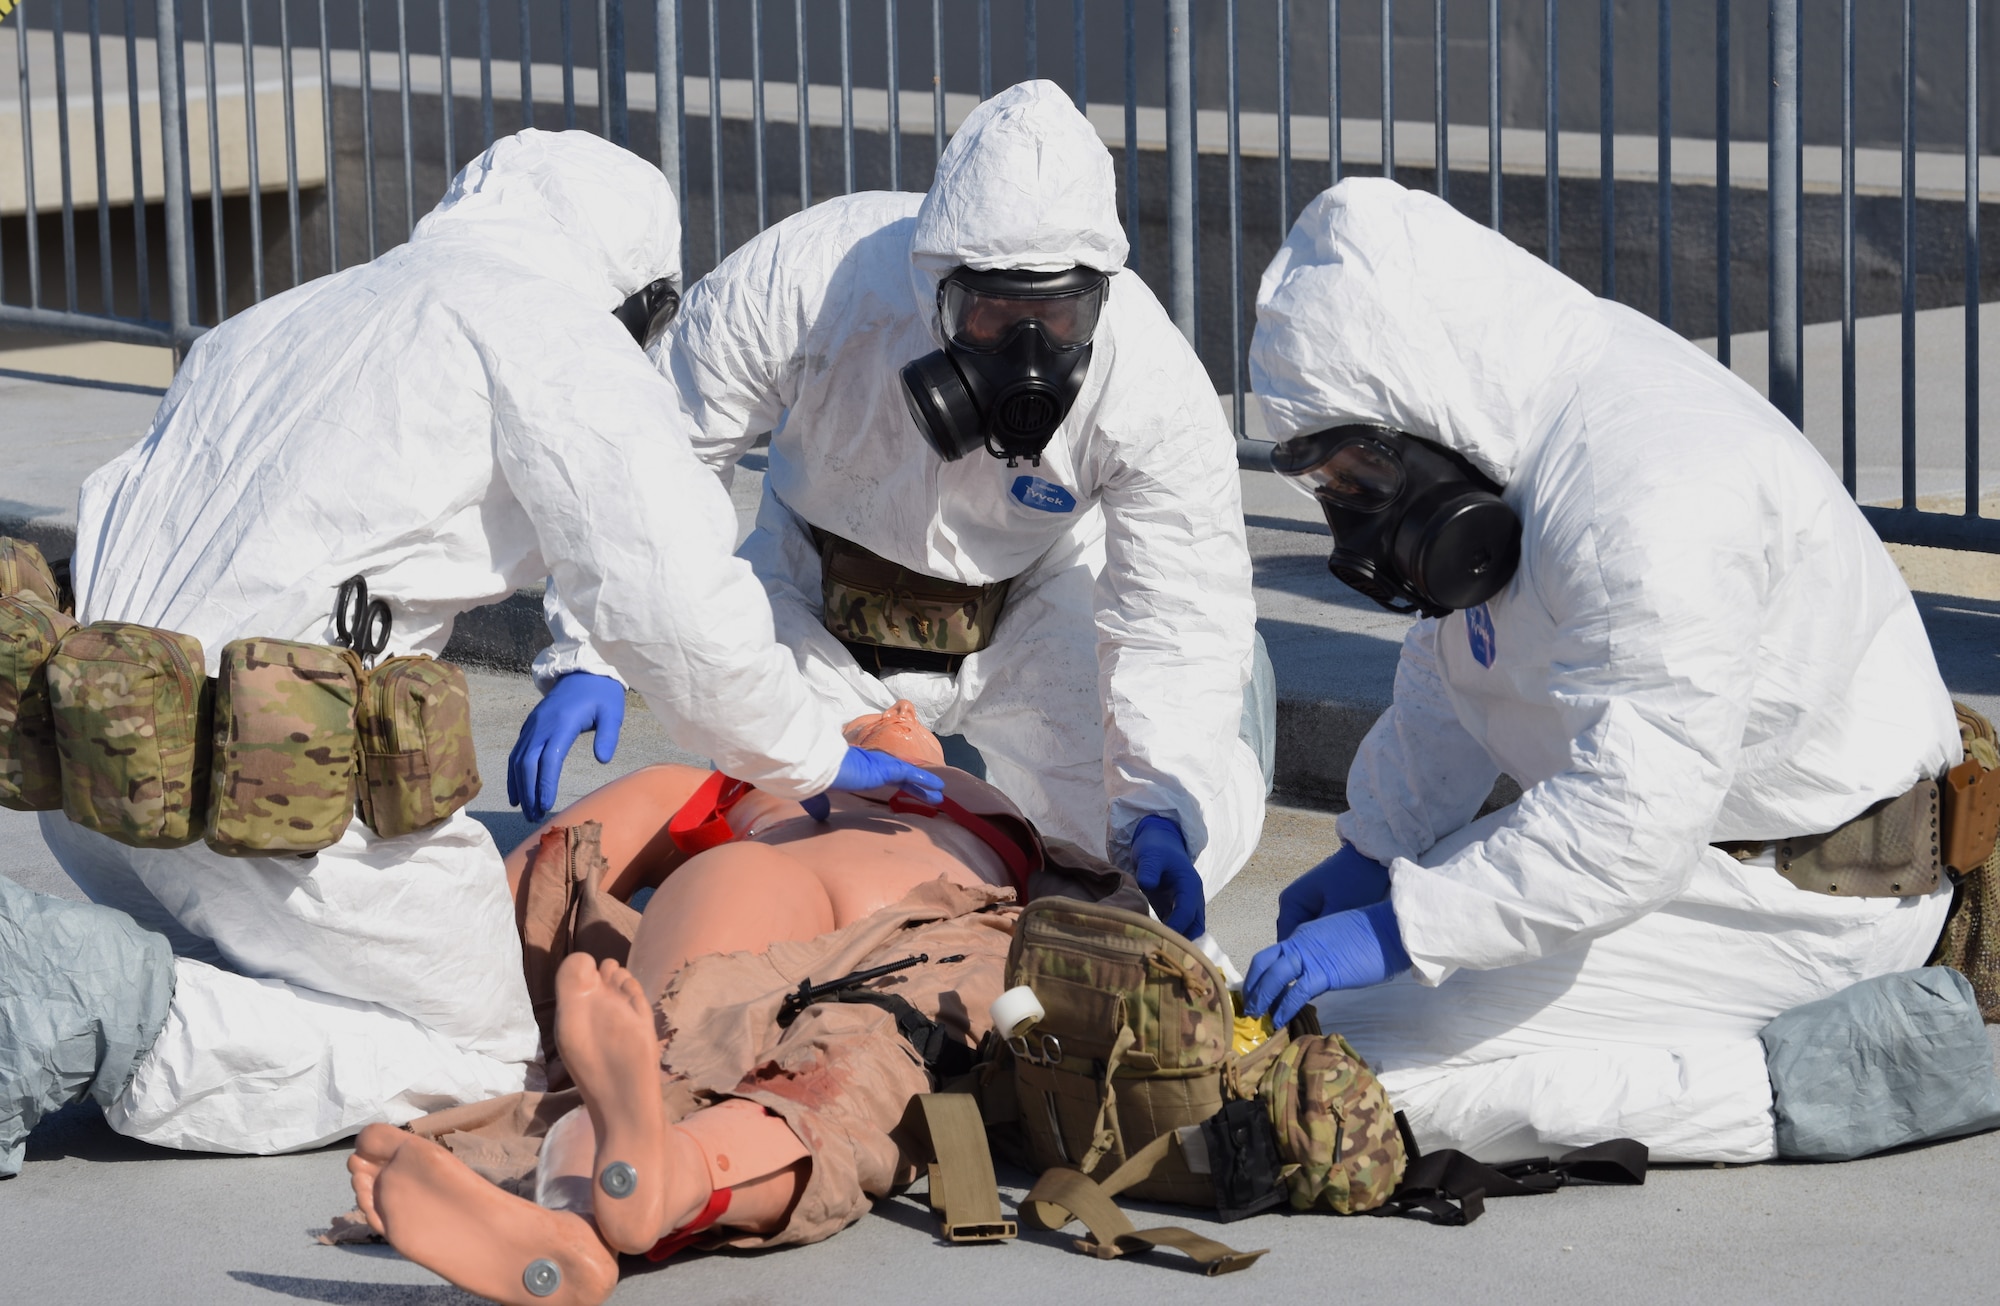 U.S. Air Force Pararescuemen conduct trauma care to a wounded mannequin.